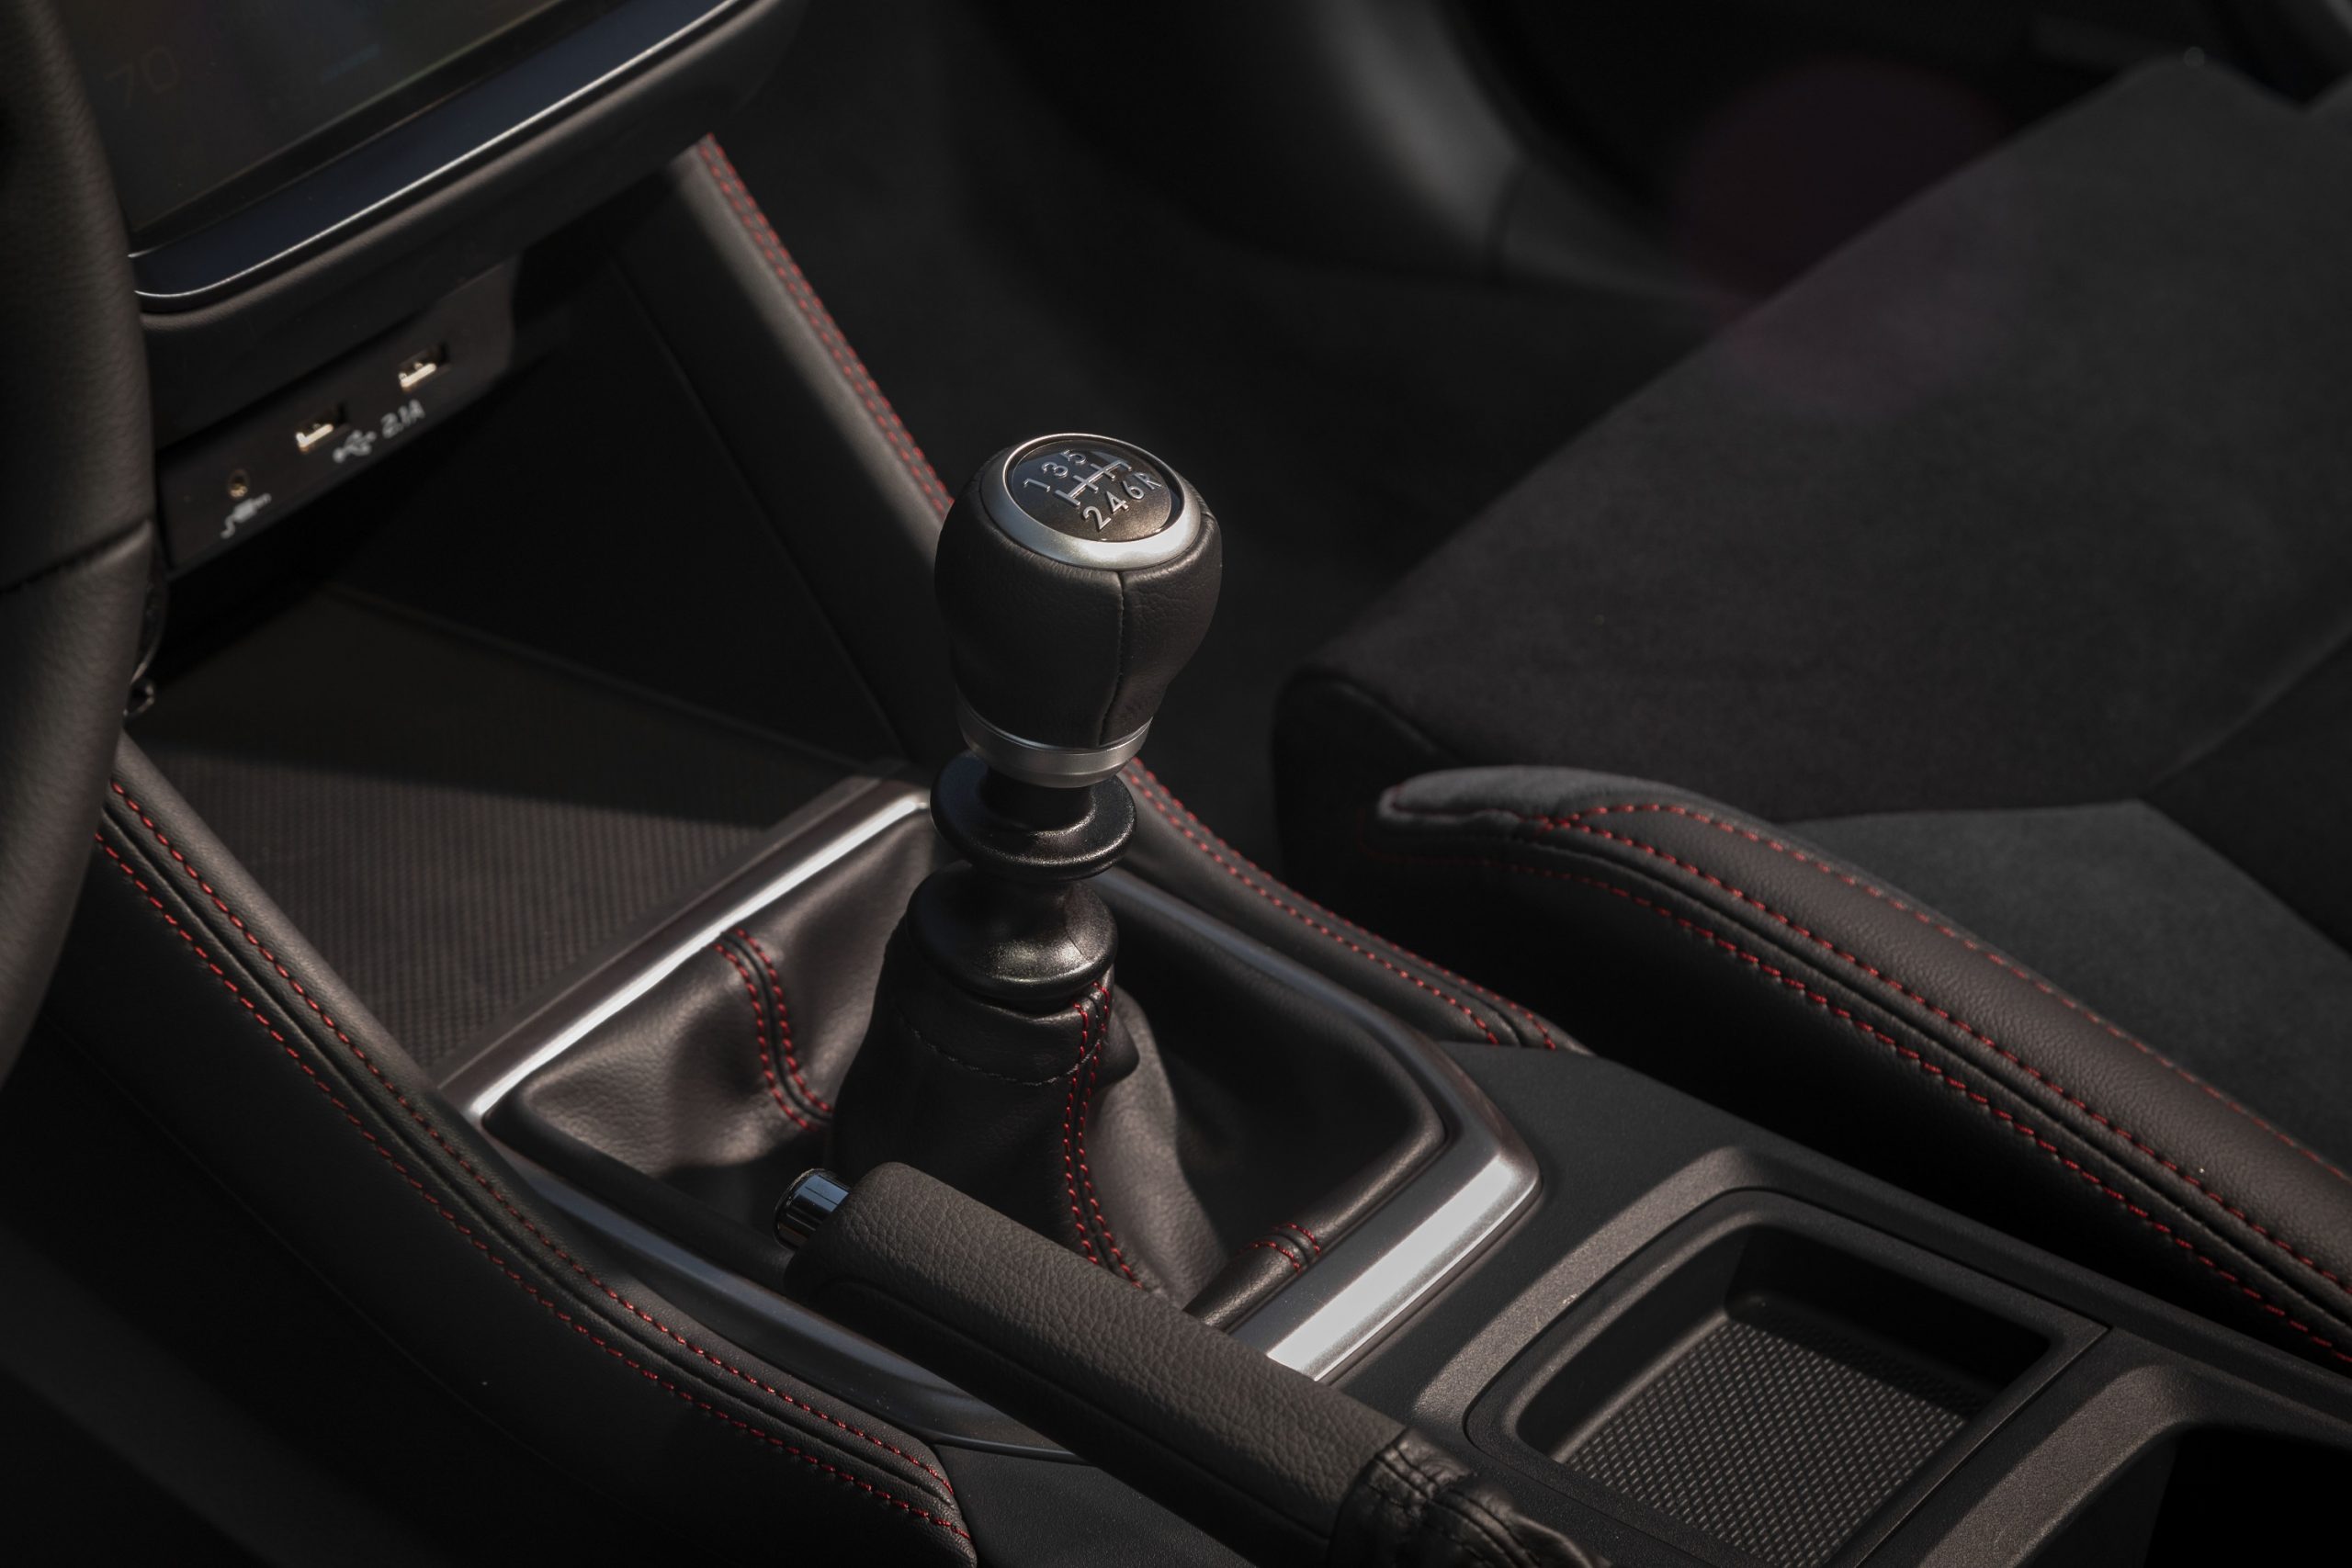 The manual transmission in the new WRX